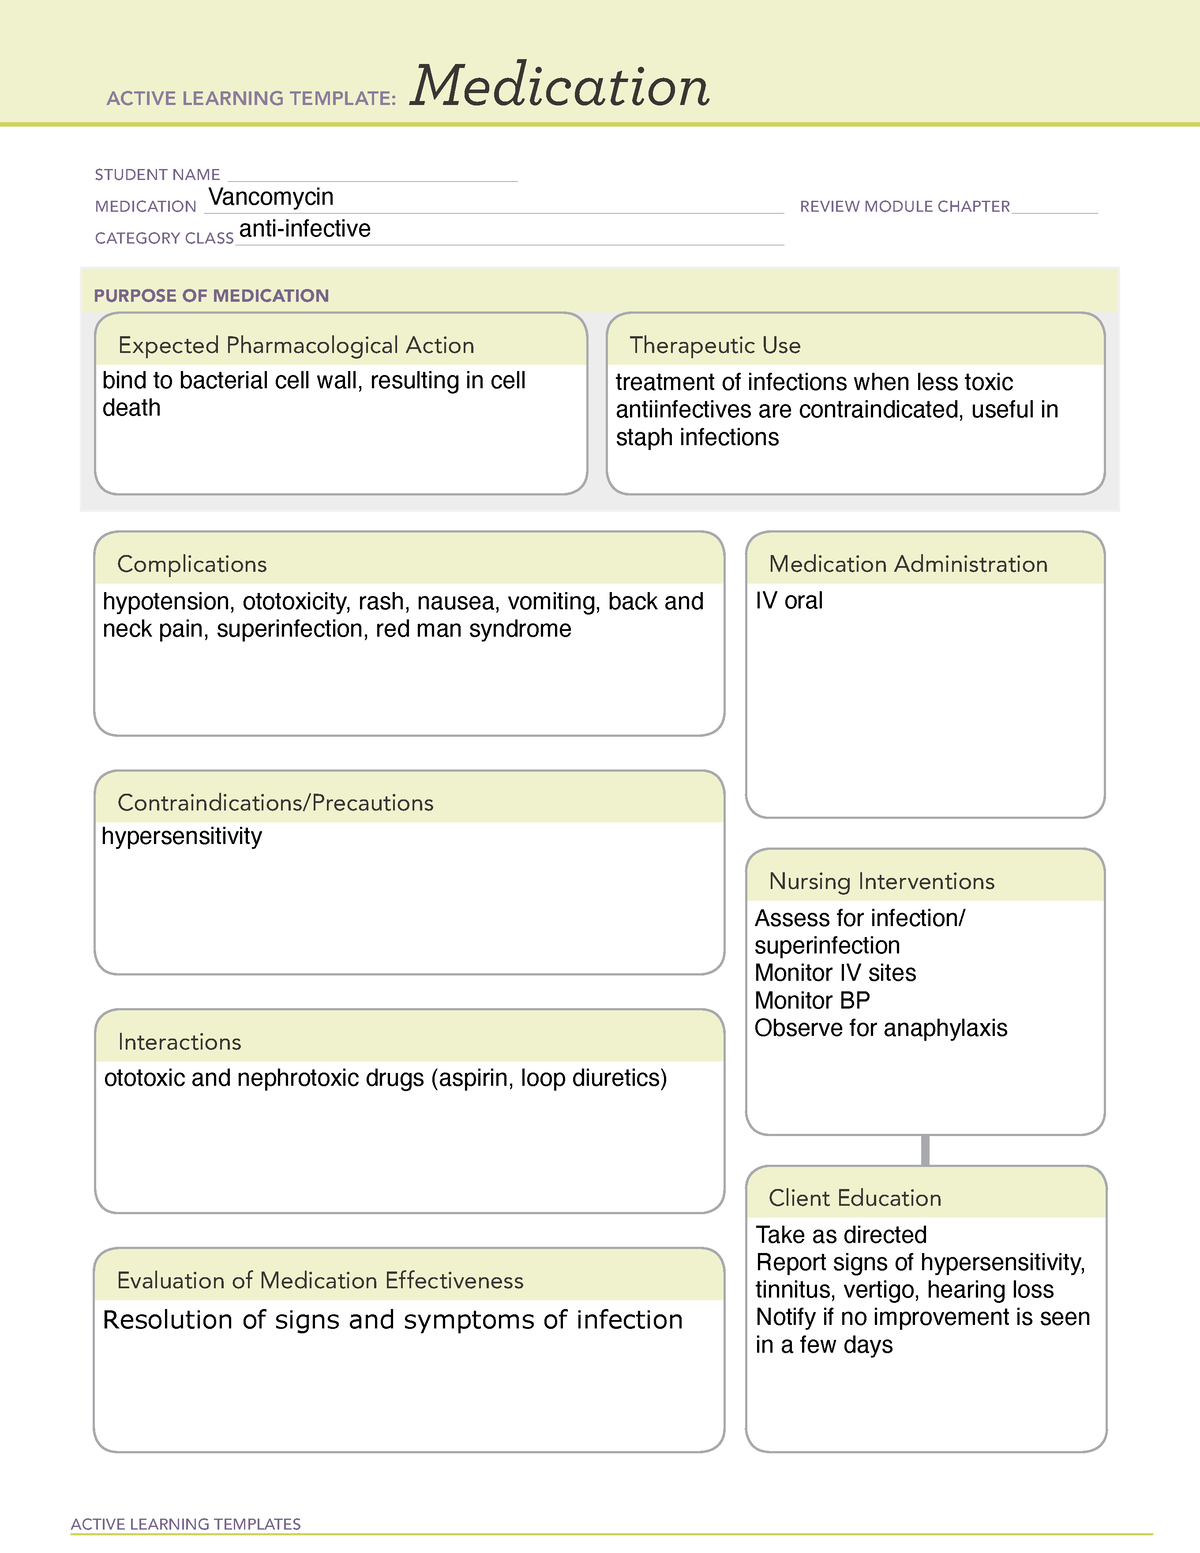 Active learning Template med ACTIVE LEARNING TEMPLATES